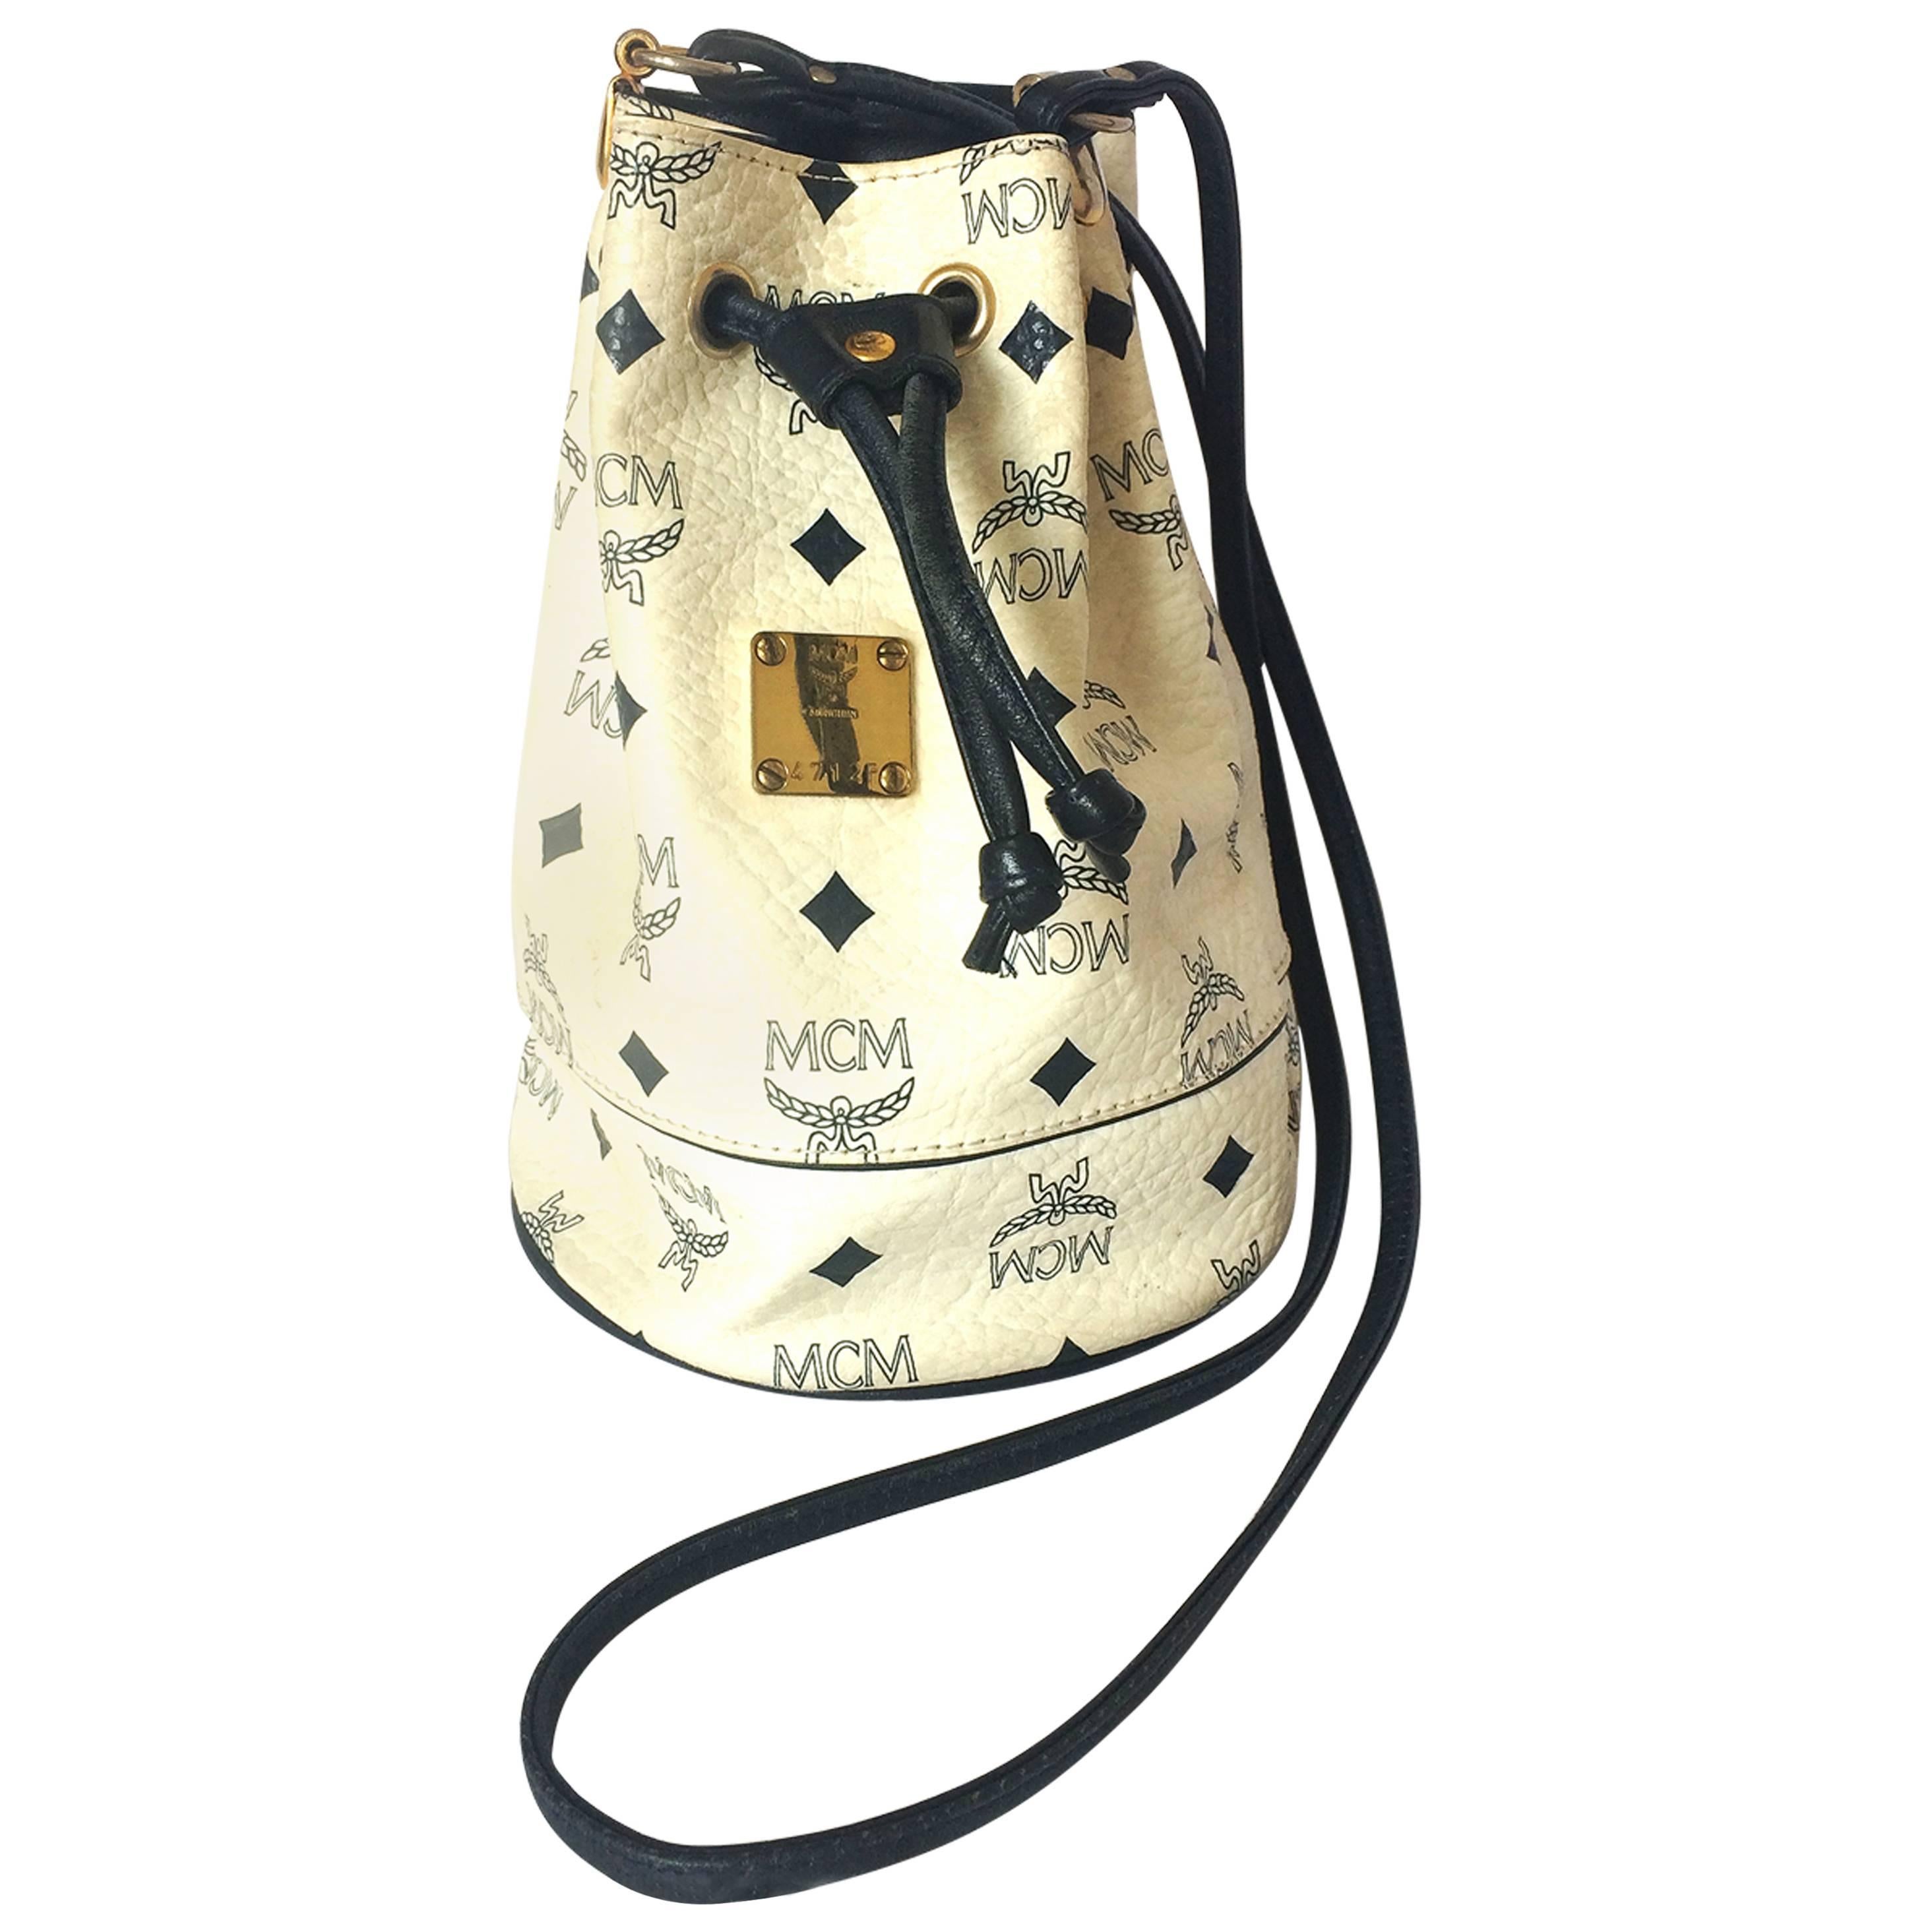 Vintage MCM white and navy monogram small hobo bucket bag. So chic and cute.